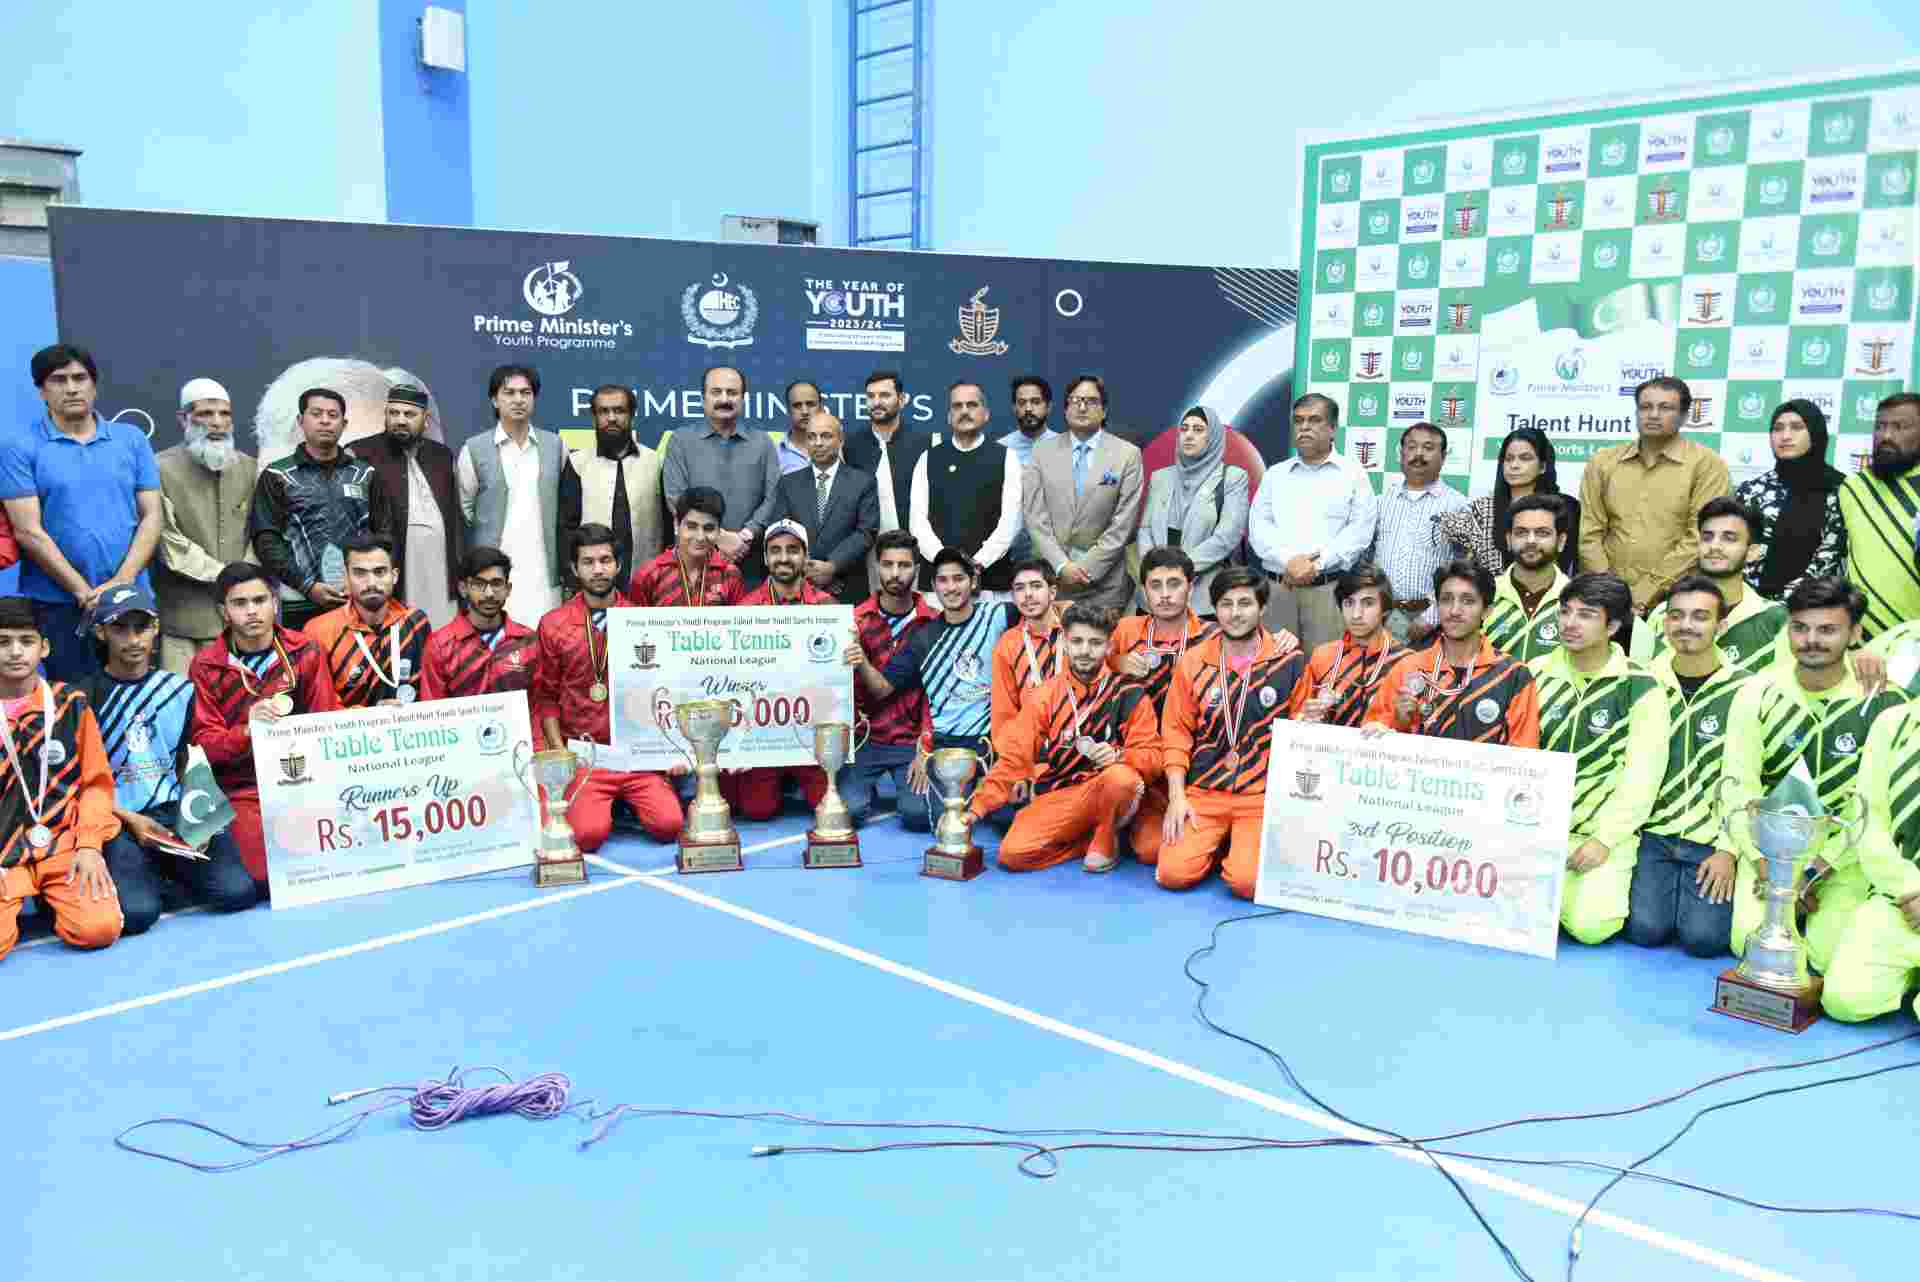 Chairman Rana Mashhood Ahmed Khan's speech at the closing ceremony of PM's National Table Tennis Youth Sports League